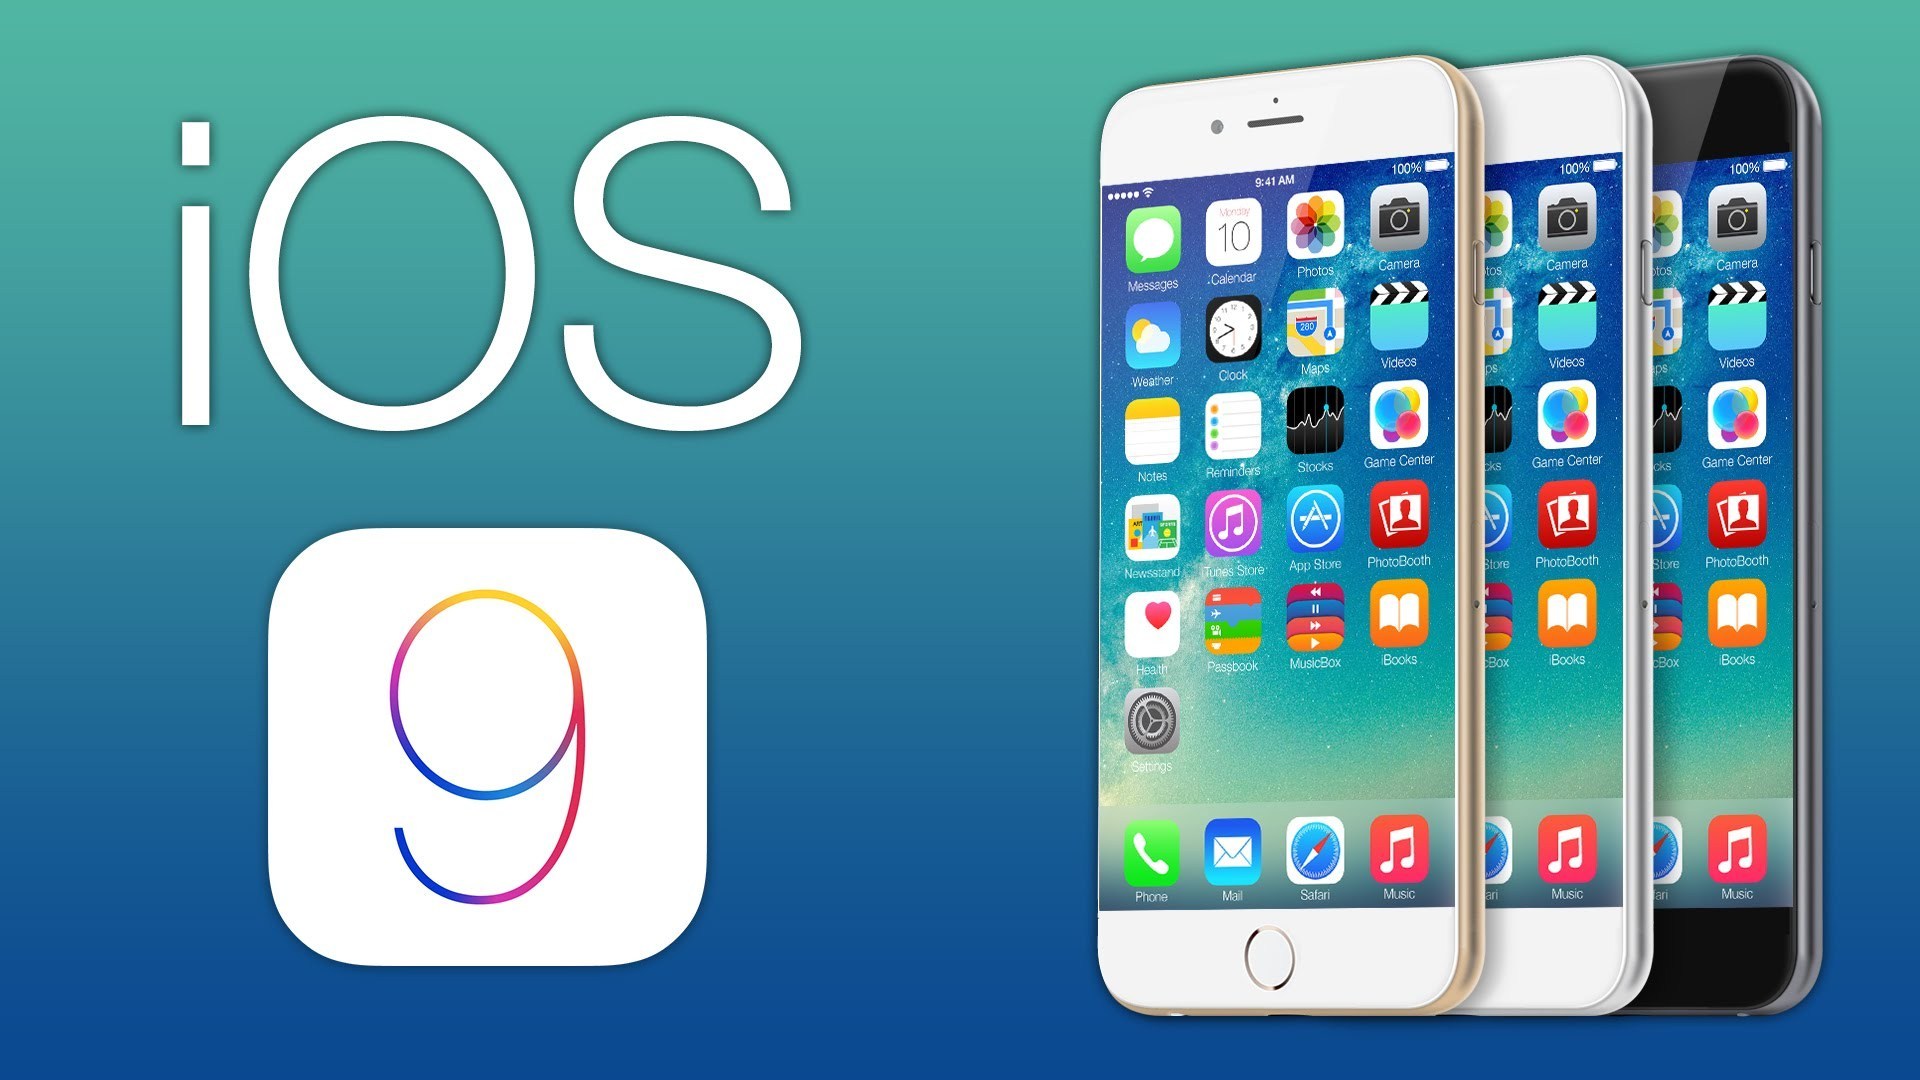 How to Update to iOS 9 on Apple iPhone and iPadInstall iOS 9 and Get Latest Features and Better Performance For Free